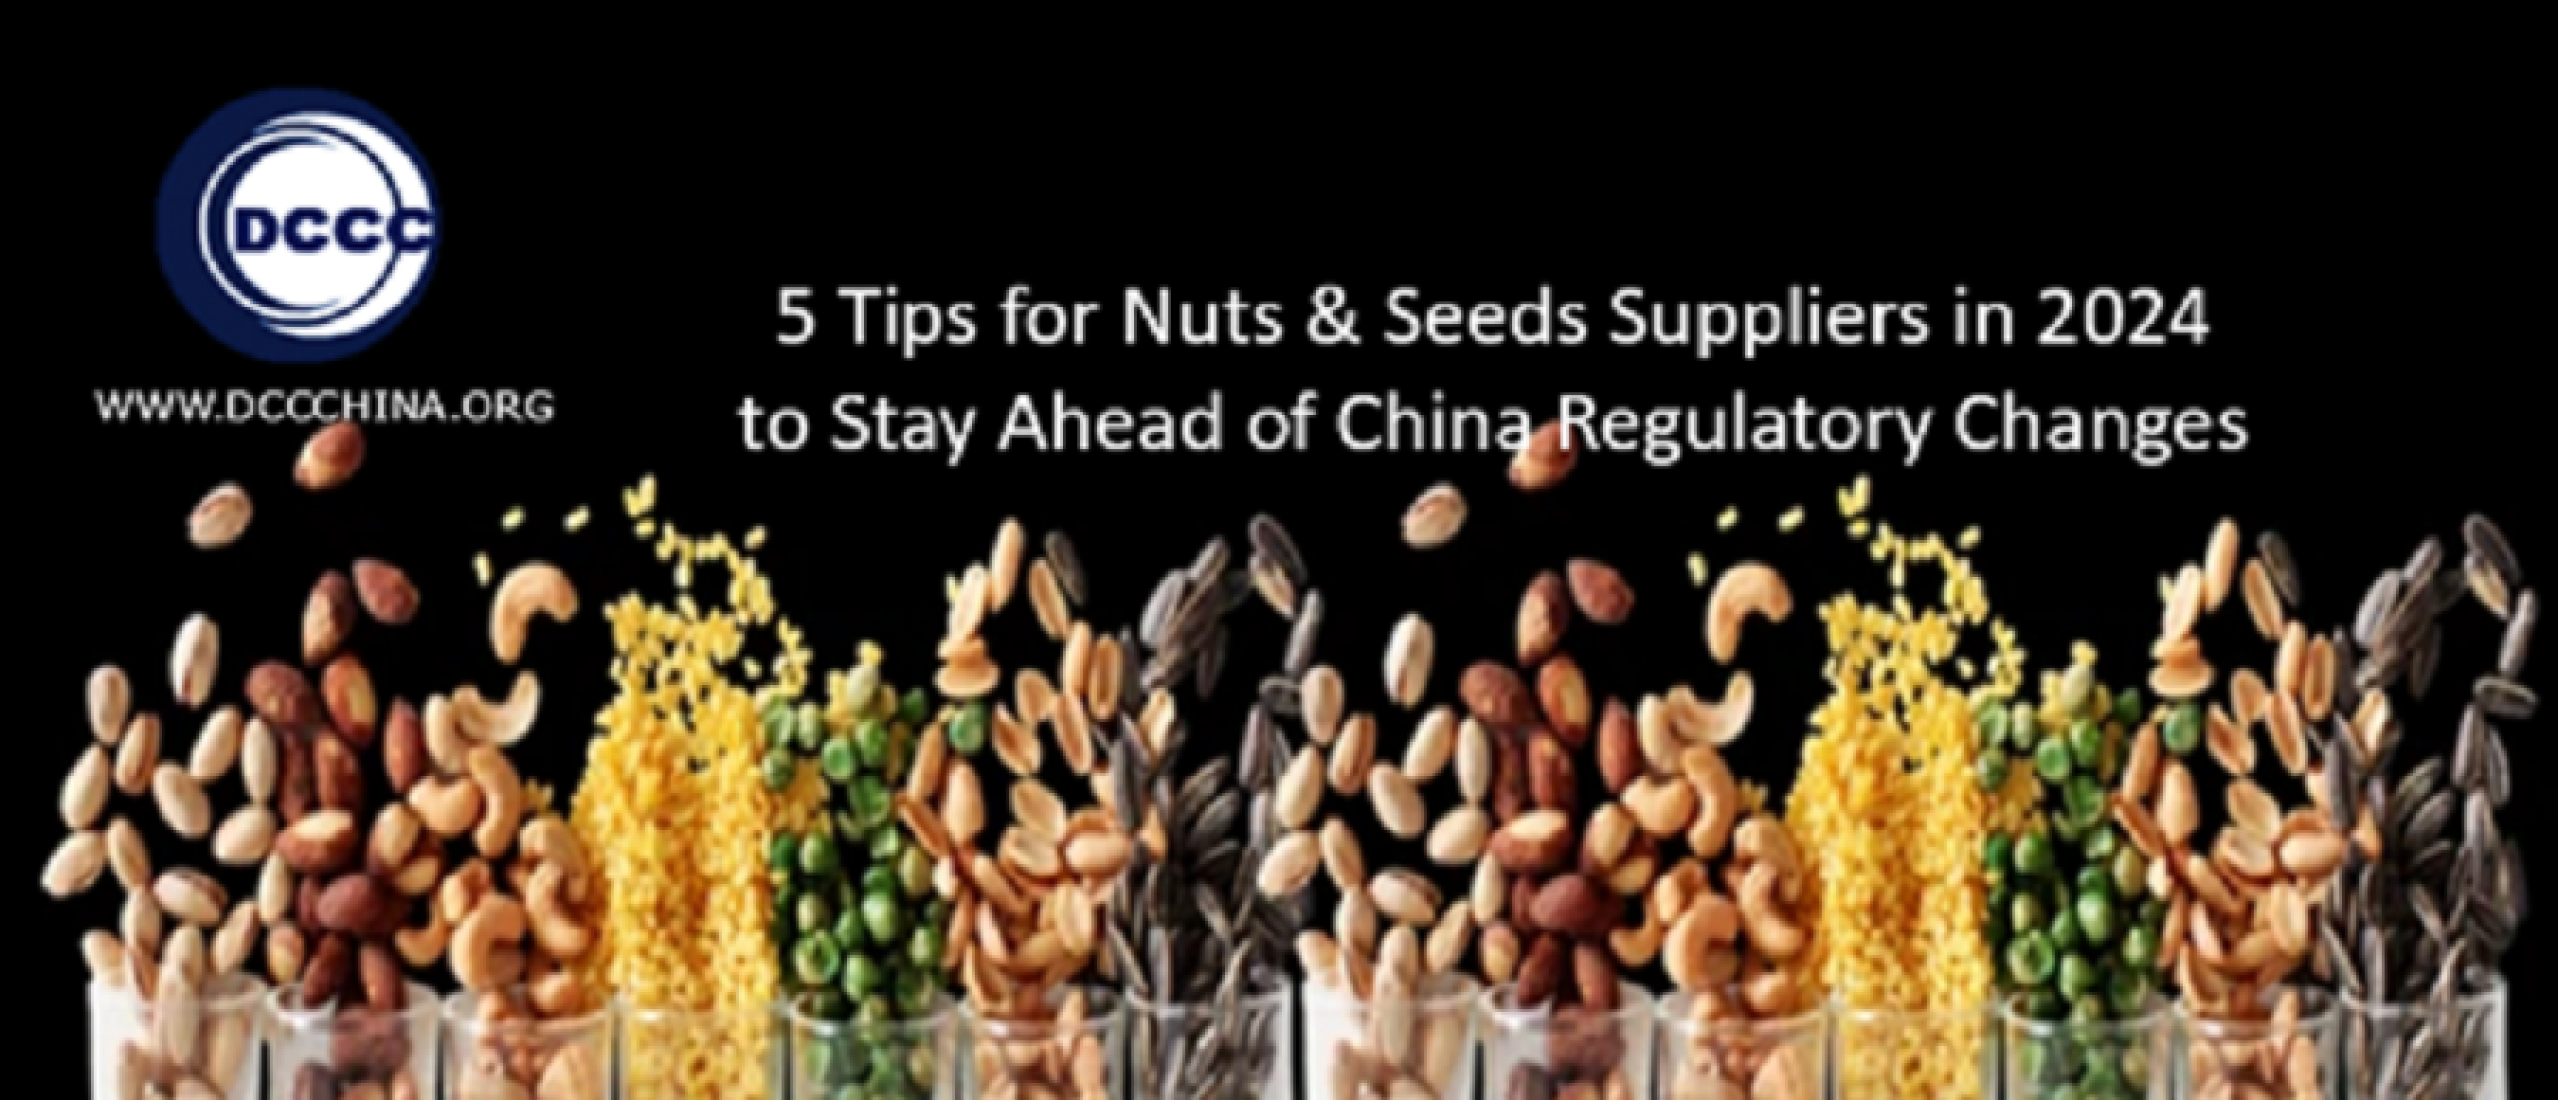 5 Tips for nuts & seeds suppliers in 2024 to stay ahead of China regulatory changes